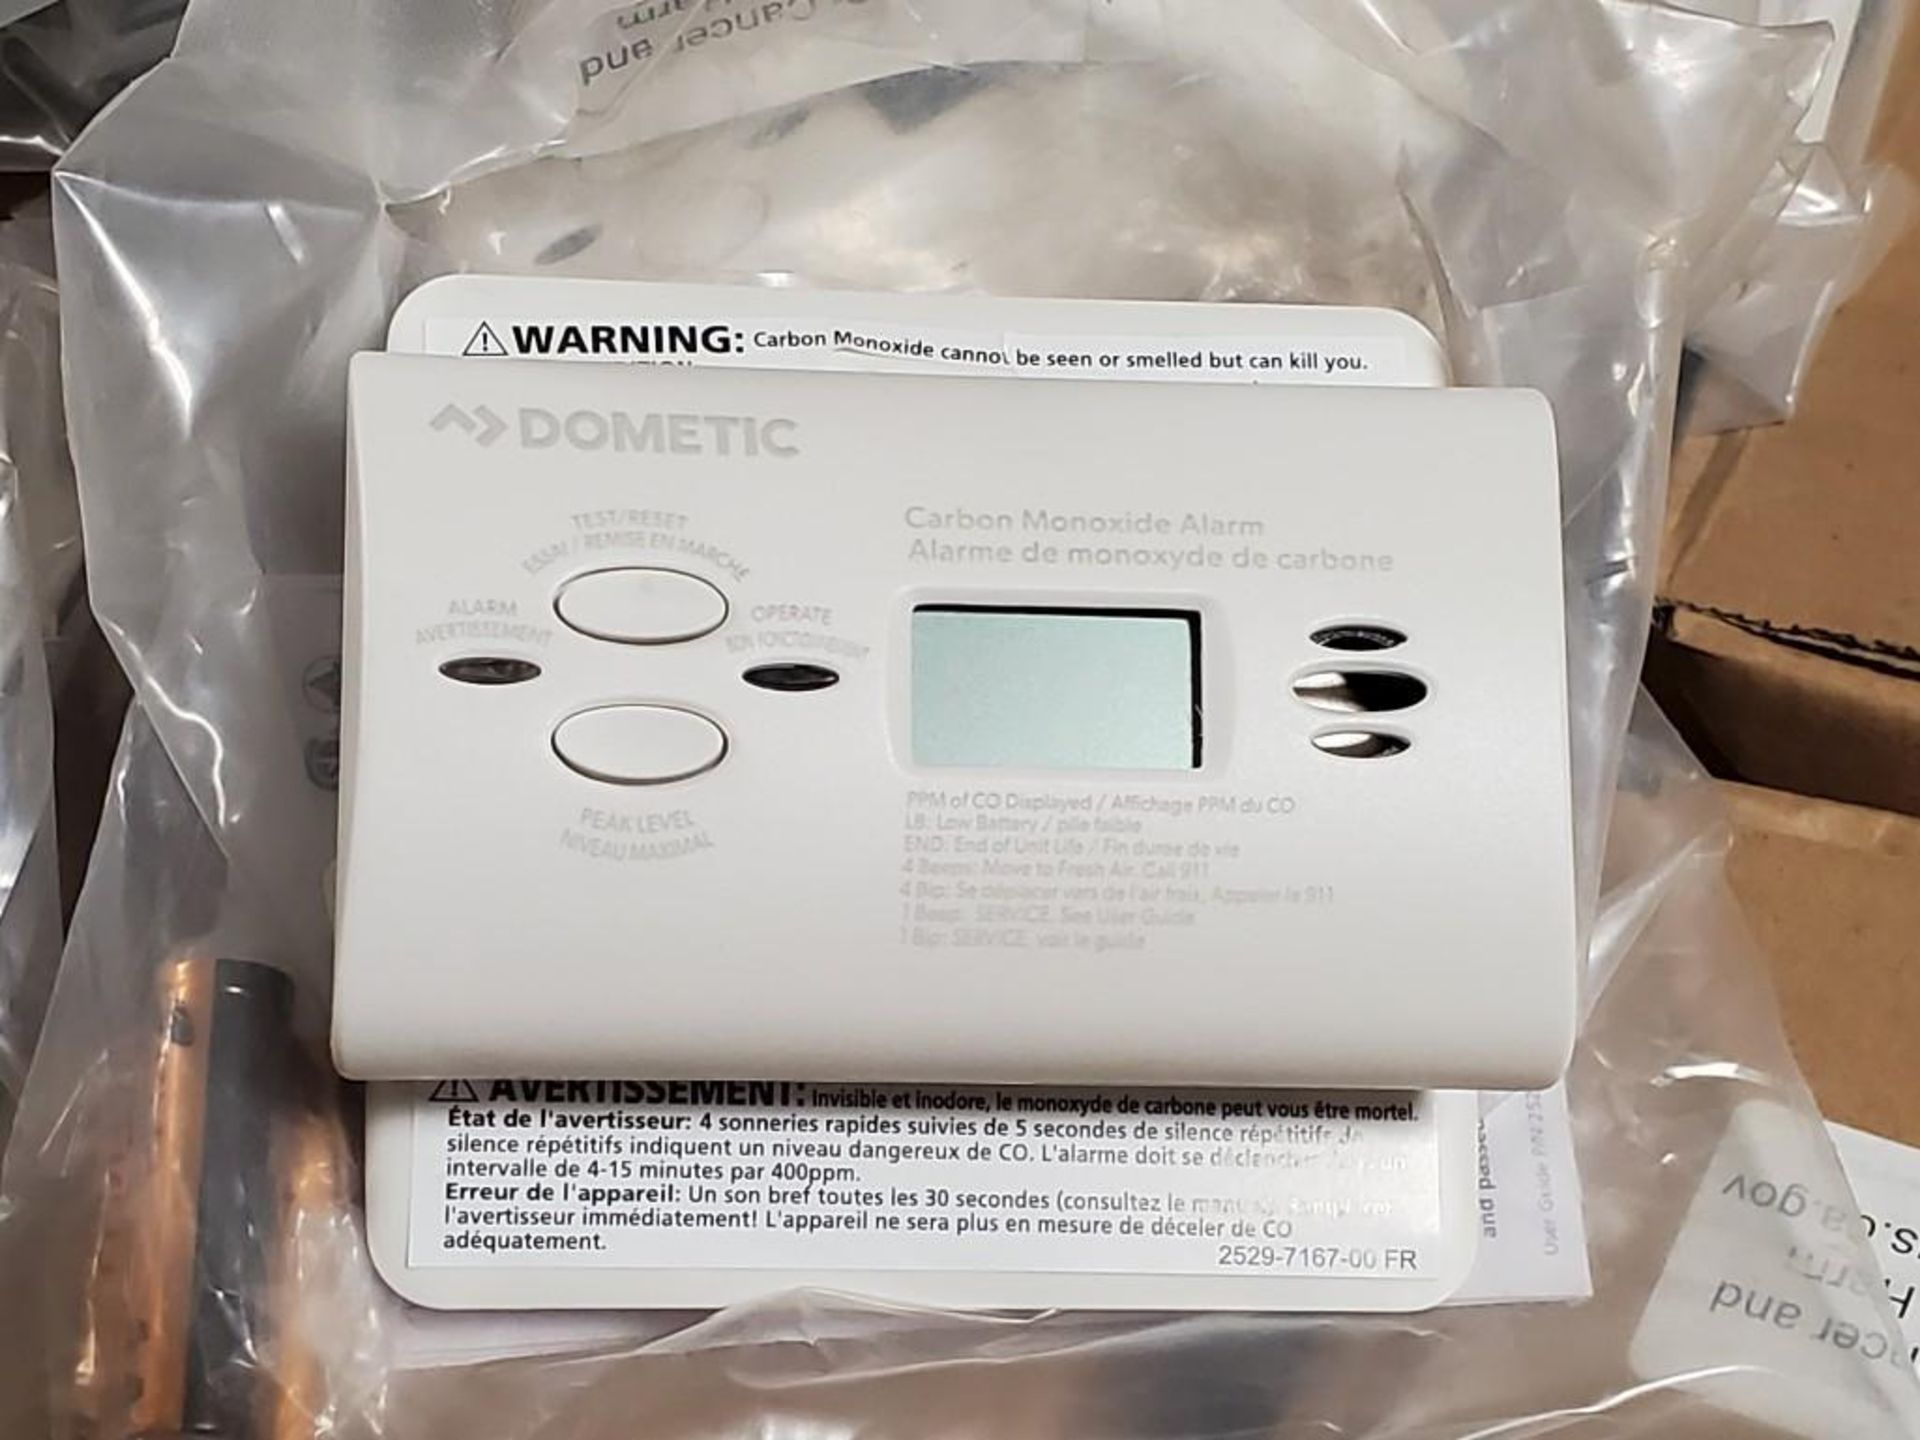 Qty 72 - Dometic Carbon Monoxide detector with LCD. Model CO-900-0140-LPM. New in bulk box. 2 boxes